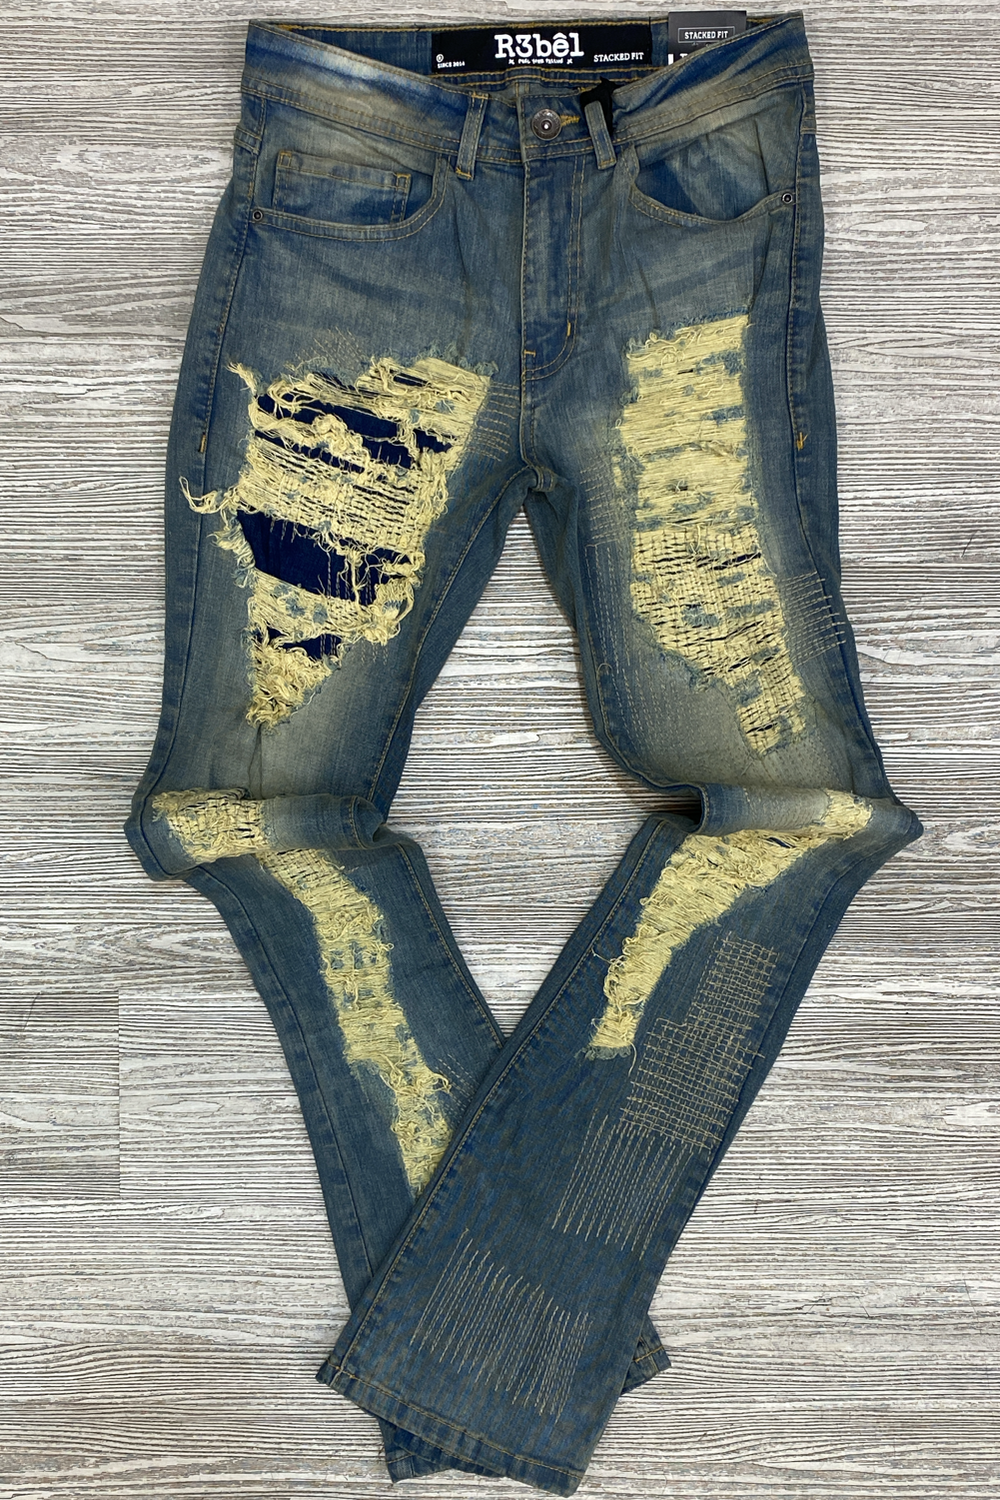 Rebel minds-rebel ripped & repaired stacked jeans